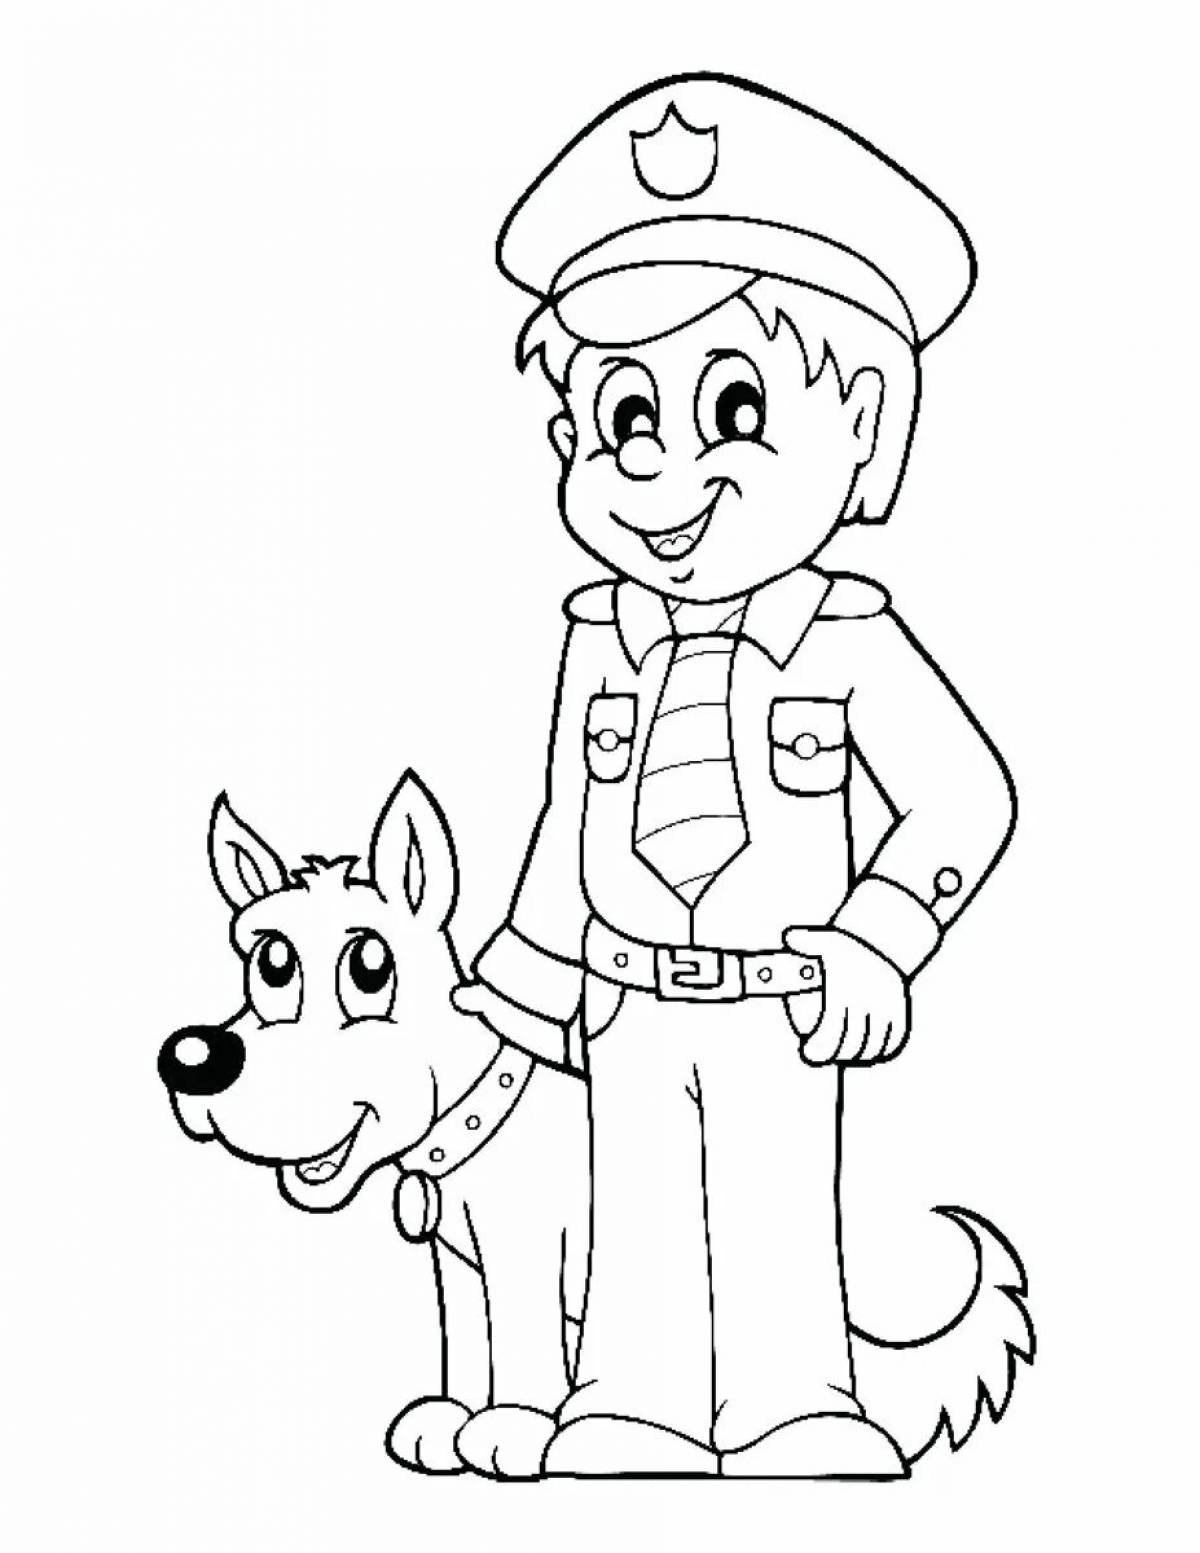 Attractive border guard with a dog for children